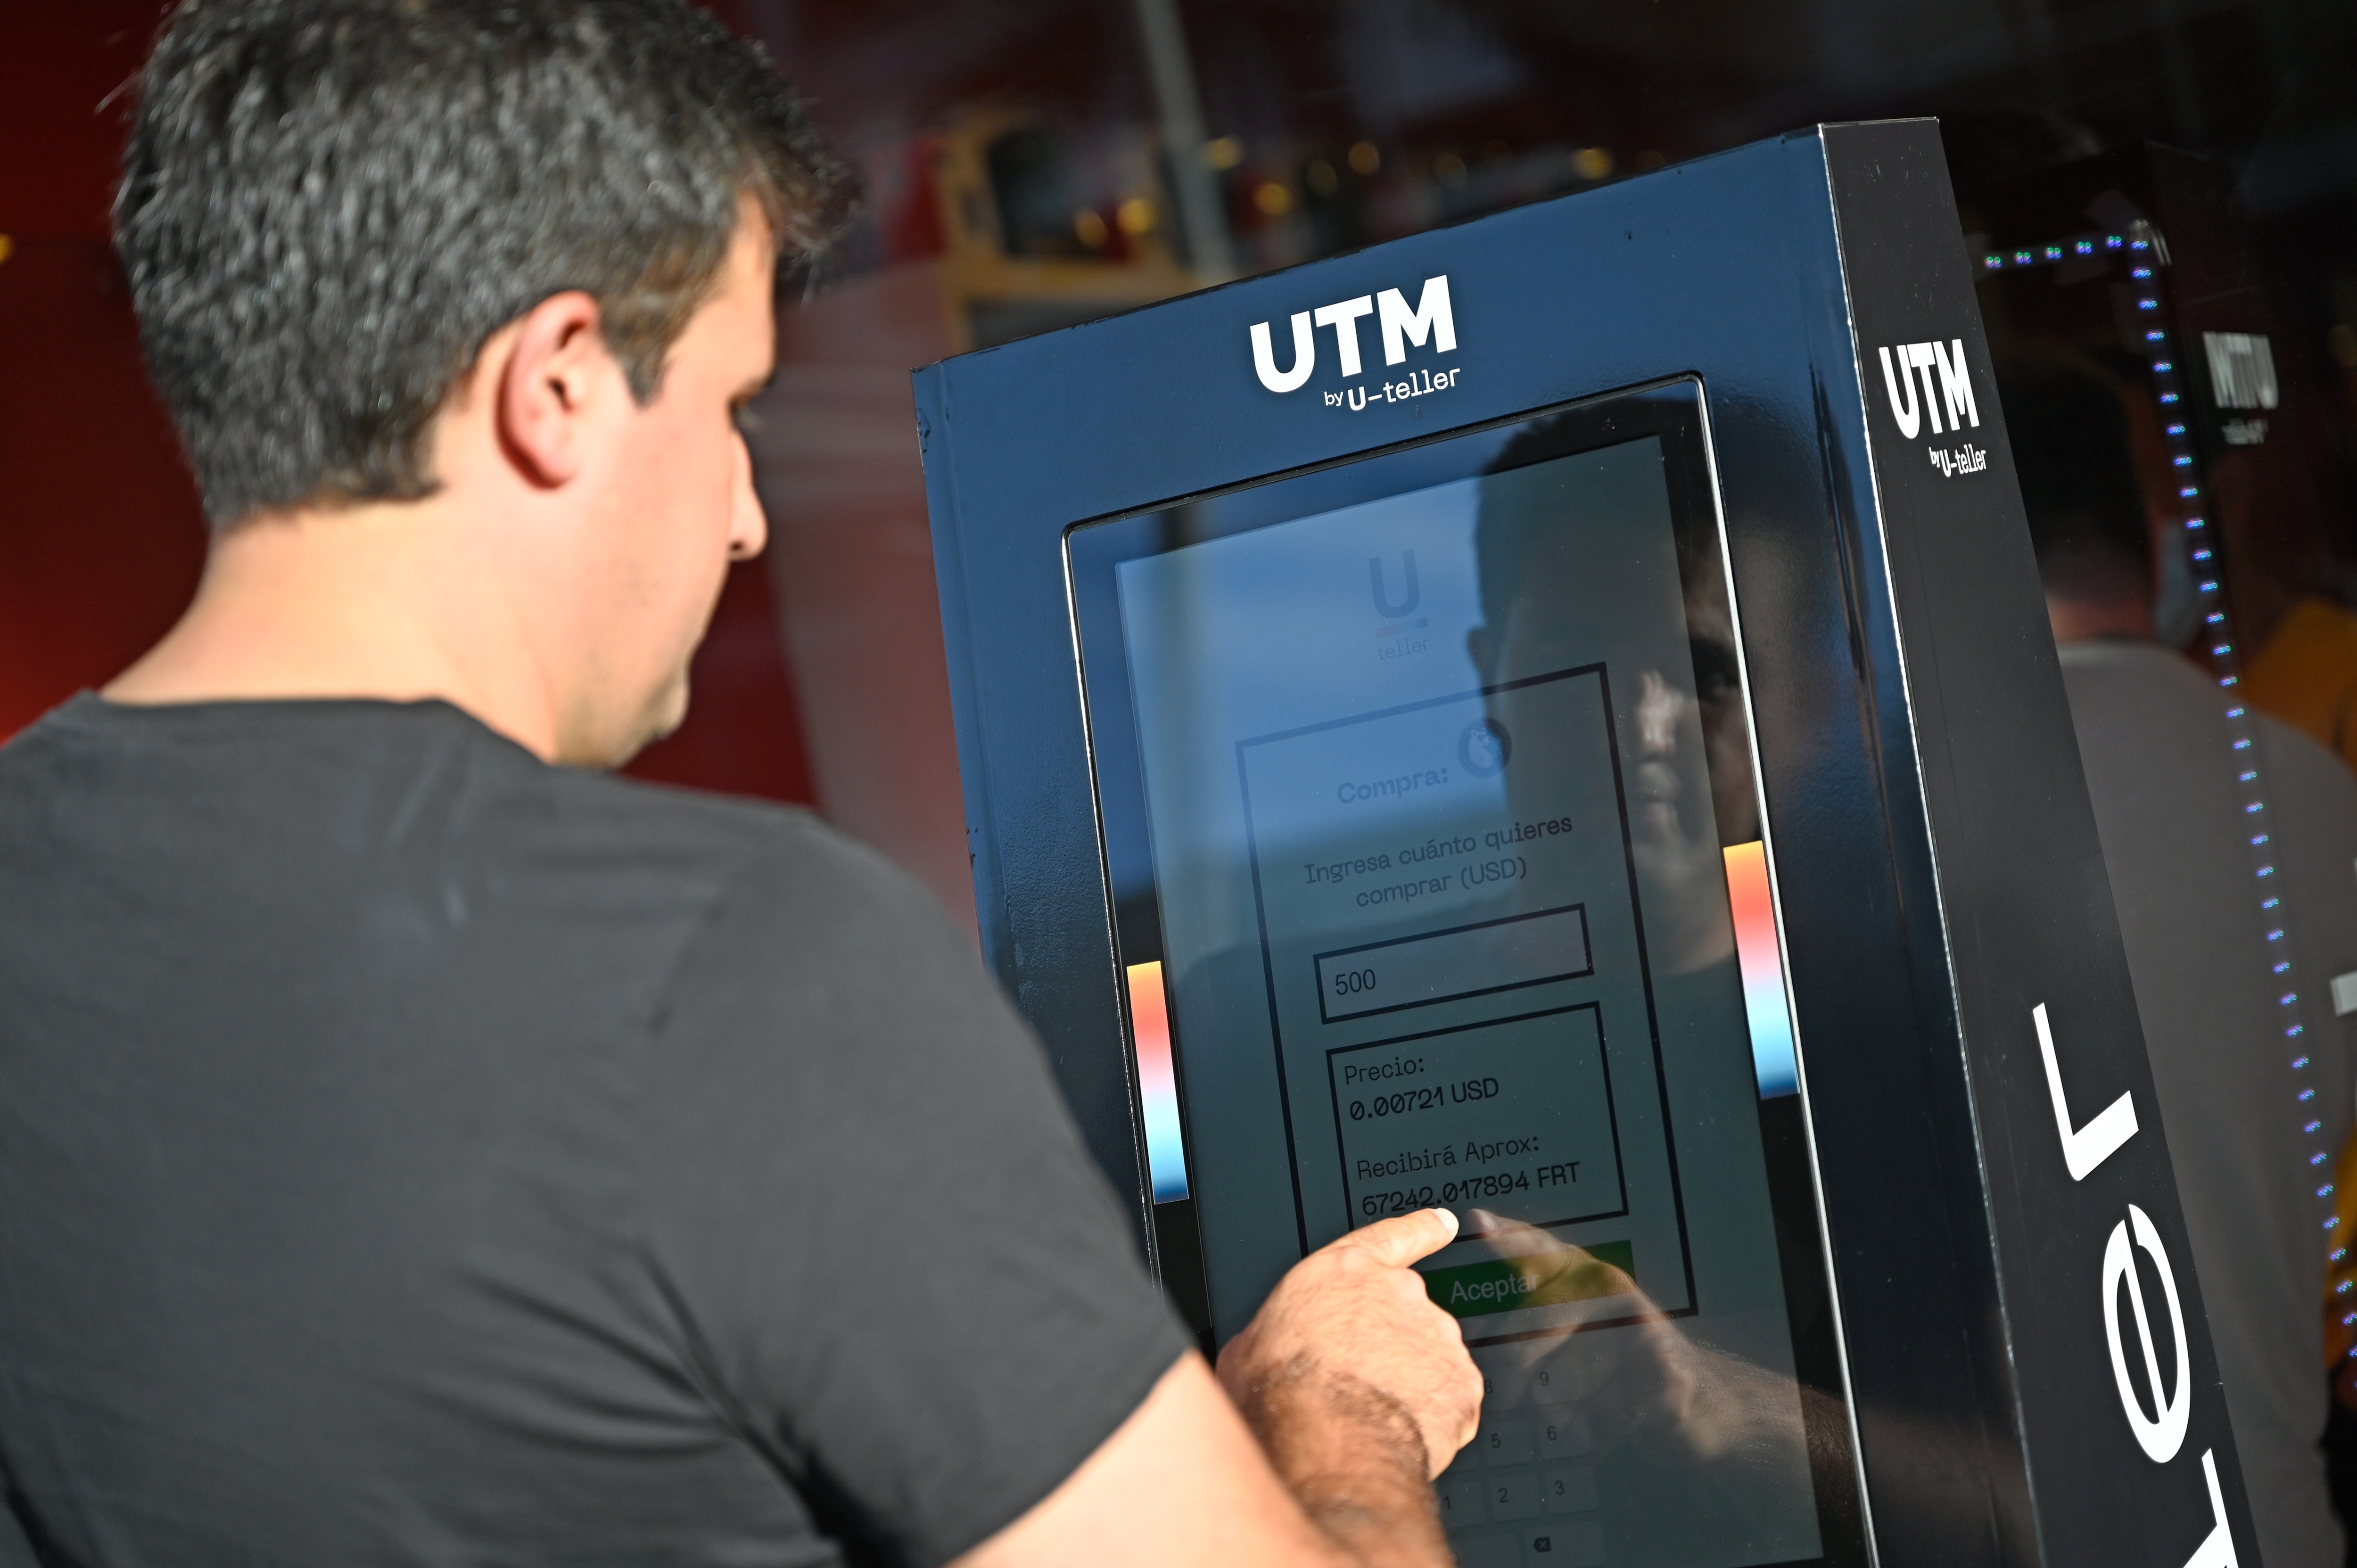 Photograph provided today by InBierto showing a person using the first cryptocurrency ATM installed in Uruguay, in Punta del Este (Uruguay).  EFE/InBierto /Carlos Lebrato